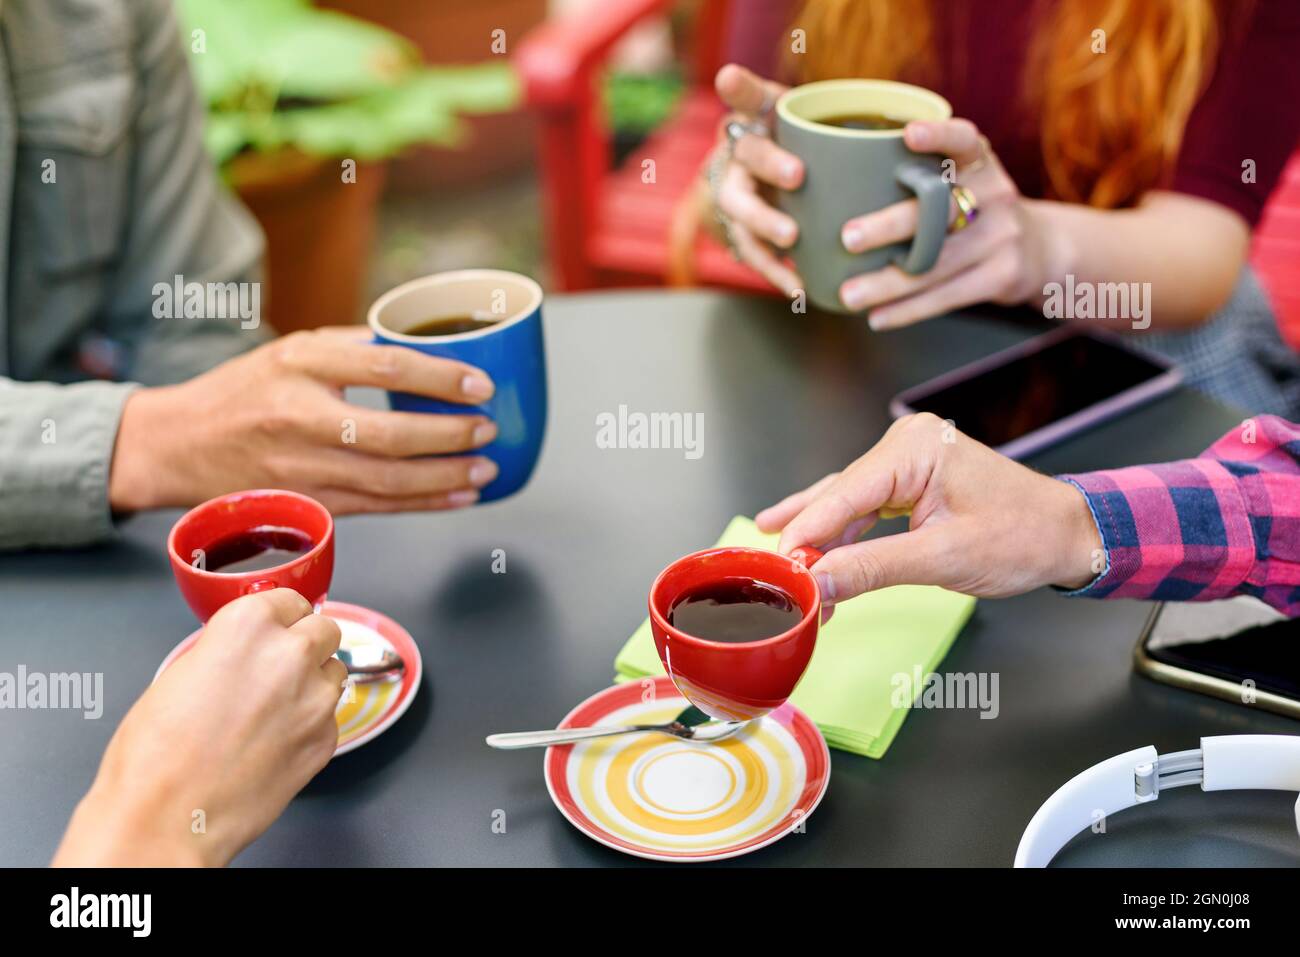 Group of young friends enjoying a coffee break together in a close up on their hands seated around a table holding mugs and cups of black coffee Stock Photo